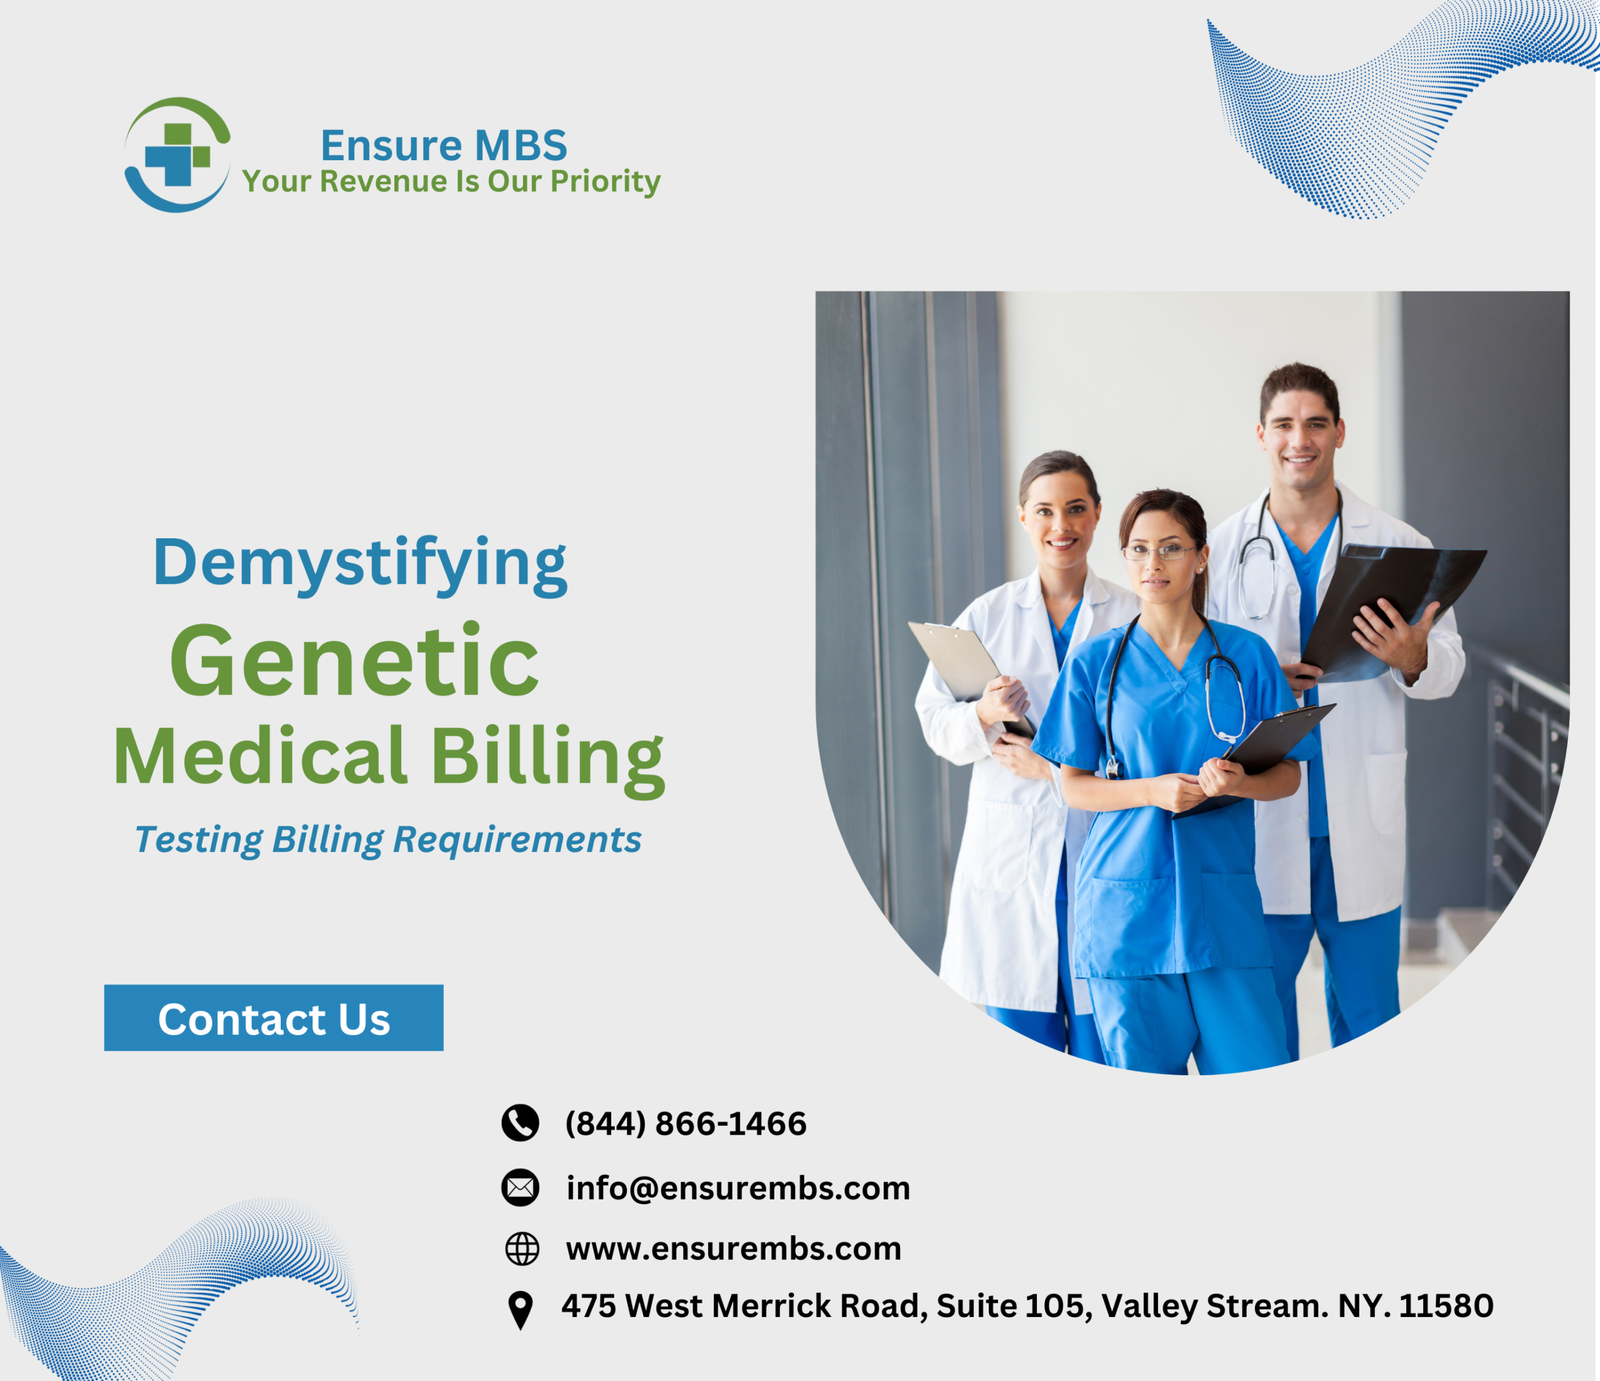 Demystifying Genetic Medical Billing and Counselling Testing Billing Requirements www.ensurembs.com